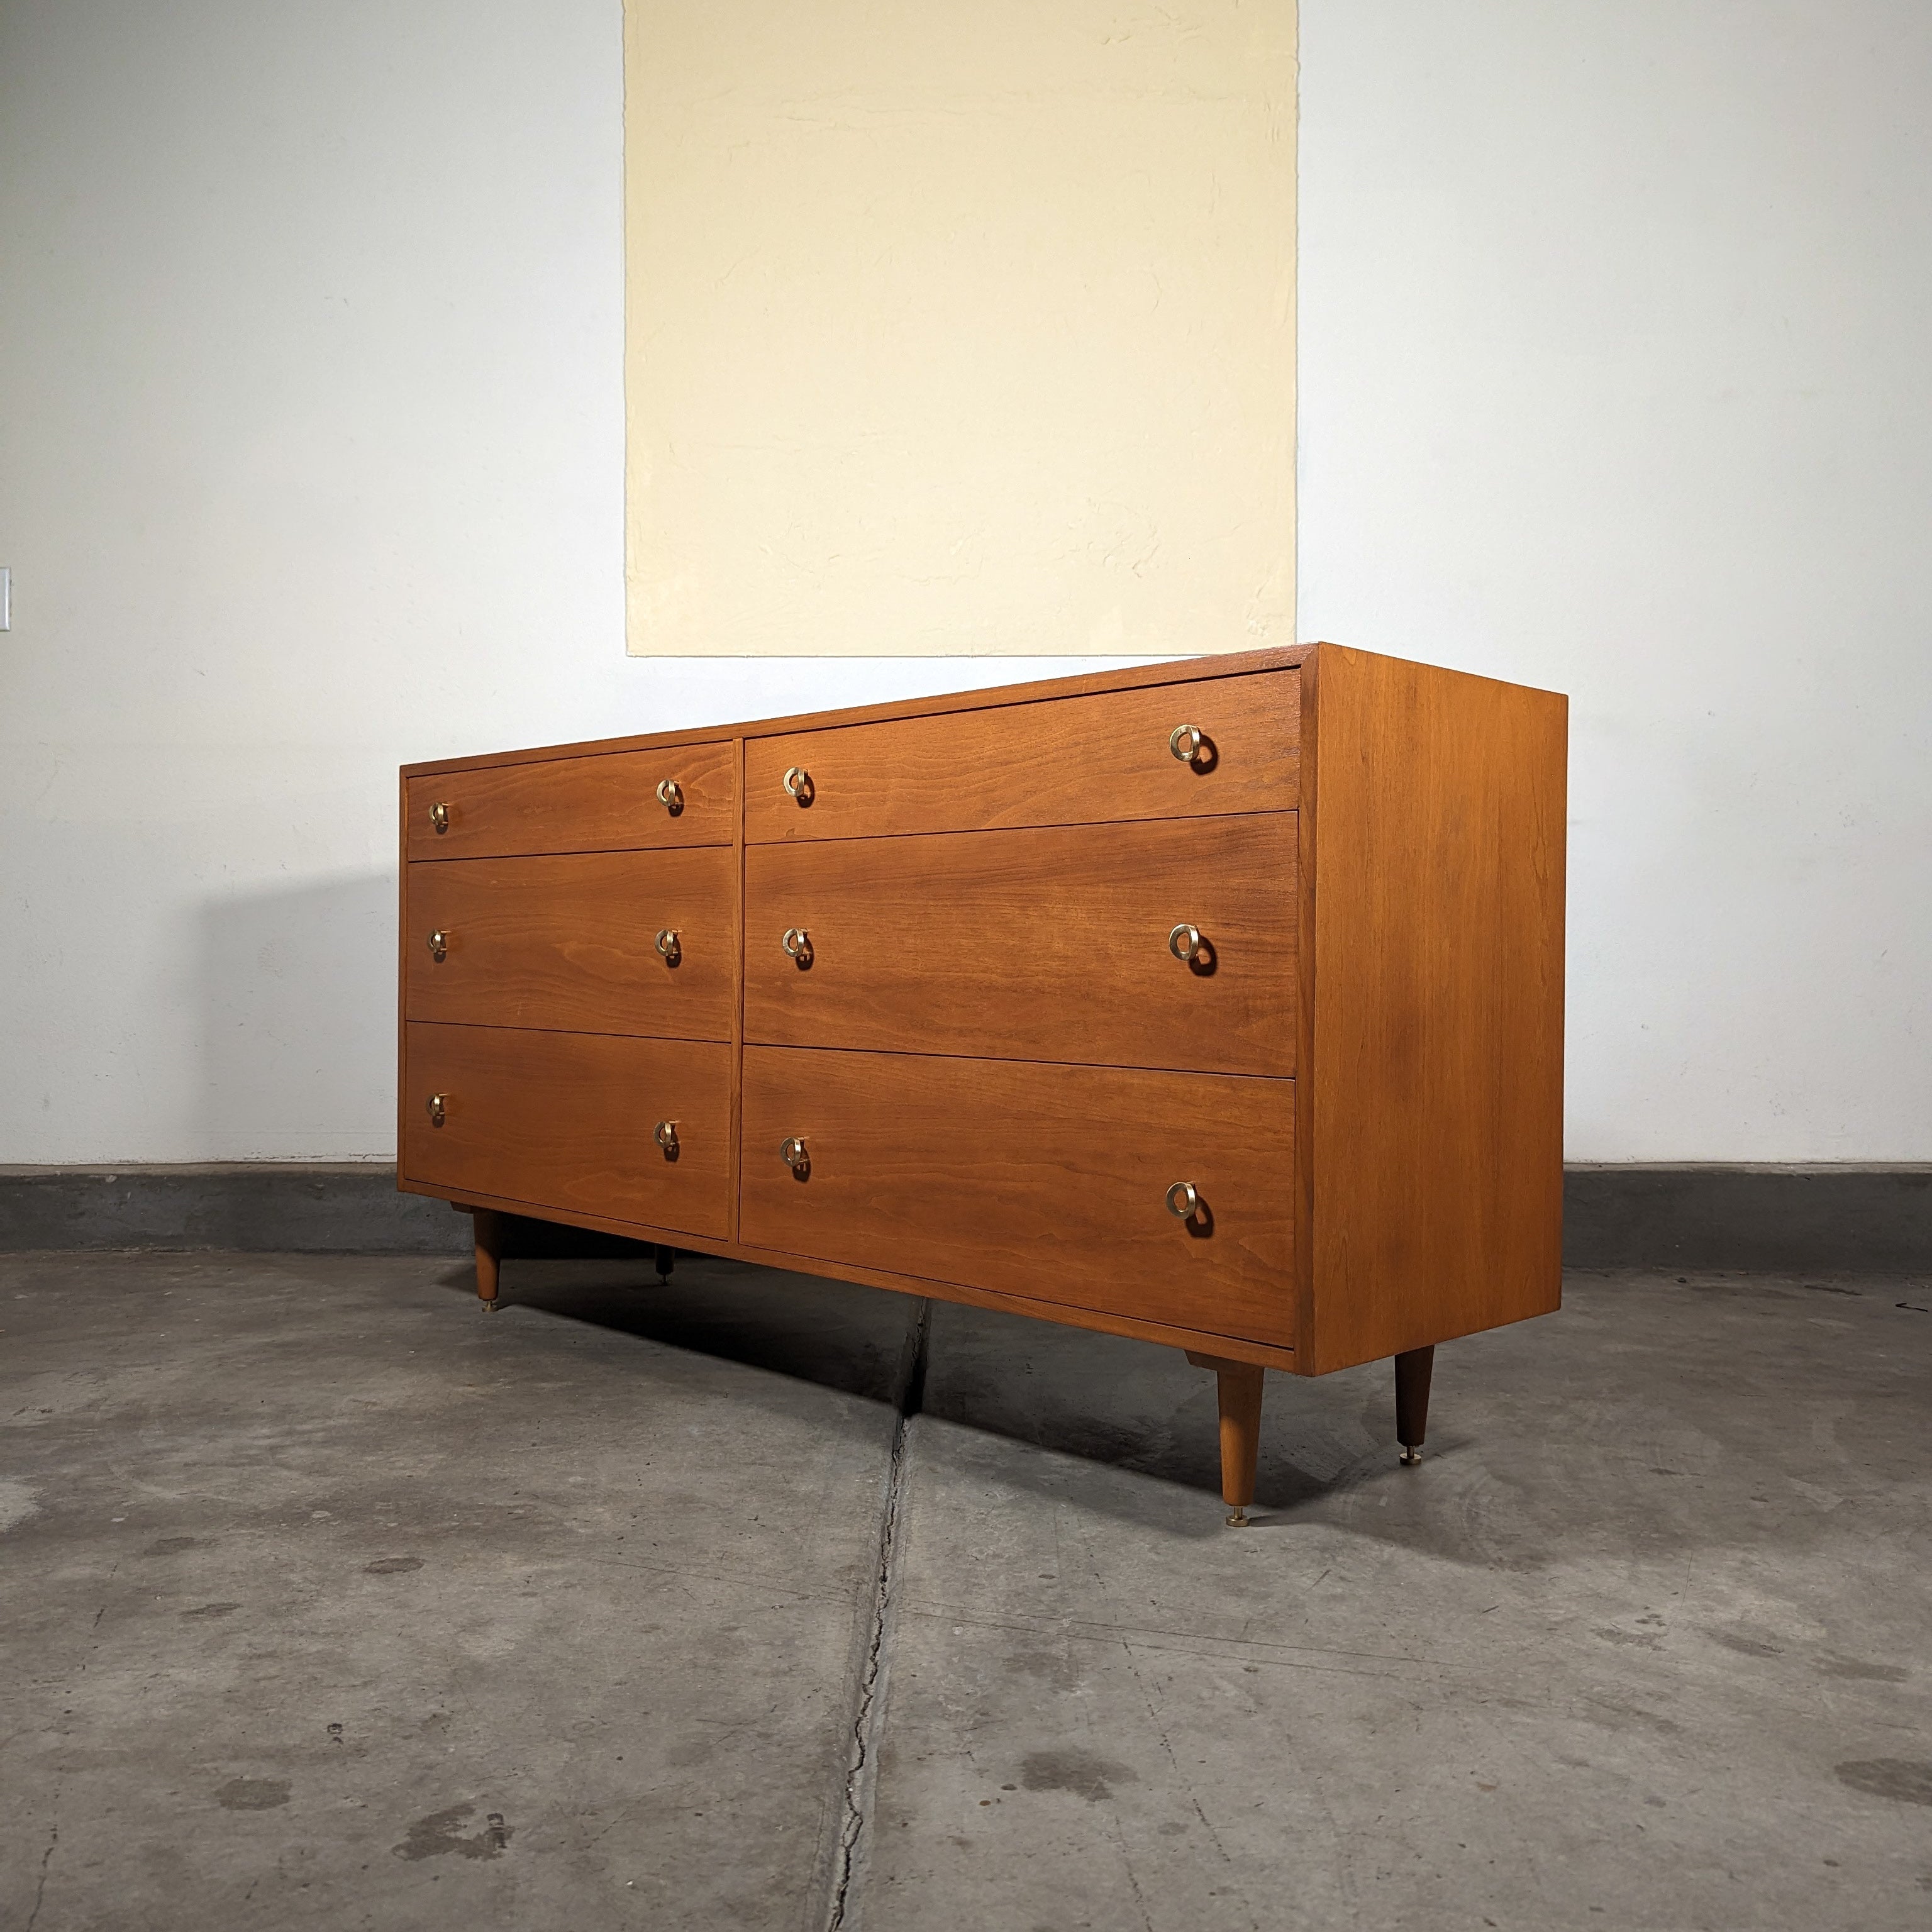 Discover the epitome of mid-century modern elegance with this stunning vintage mahogany dresser, a timeless piece designed by the renowned Greta M. Grossman for Glenn of California, circa 1950s. This exquisite dresser is a testament to Grossman's